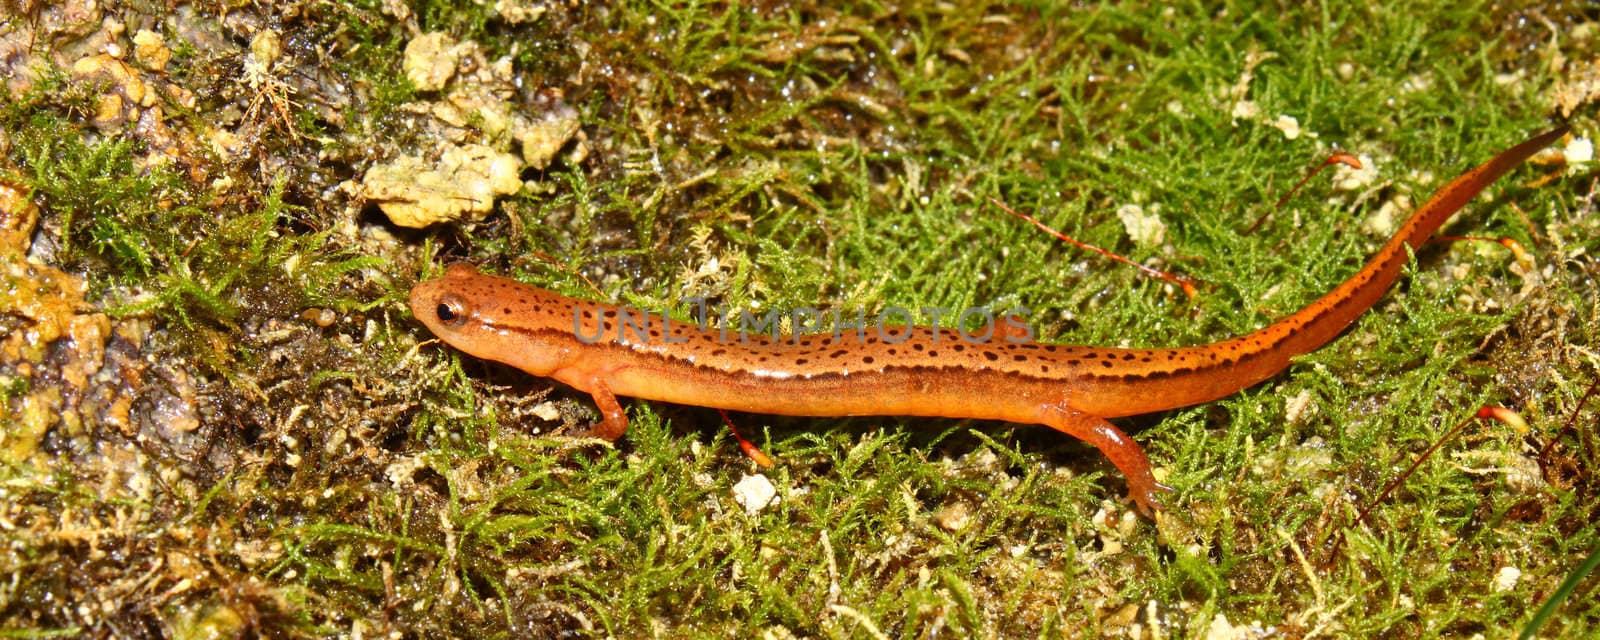 Southern Two-lined Salamander (Eurycea cirrigera) by Wirepec